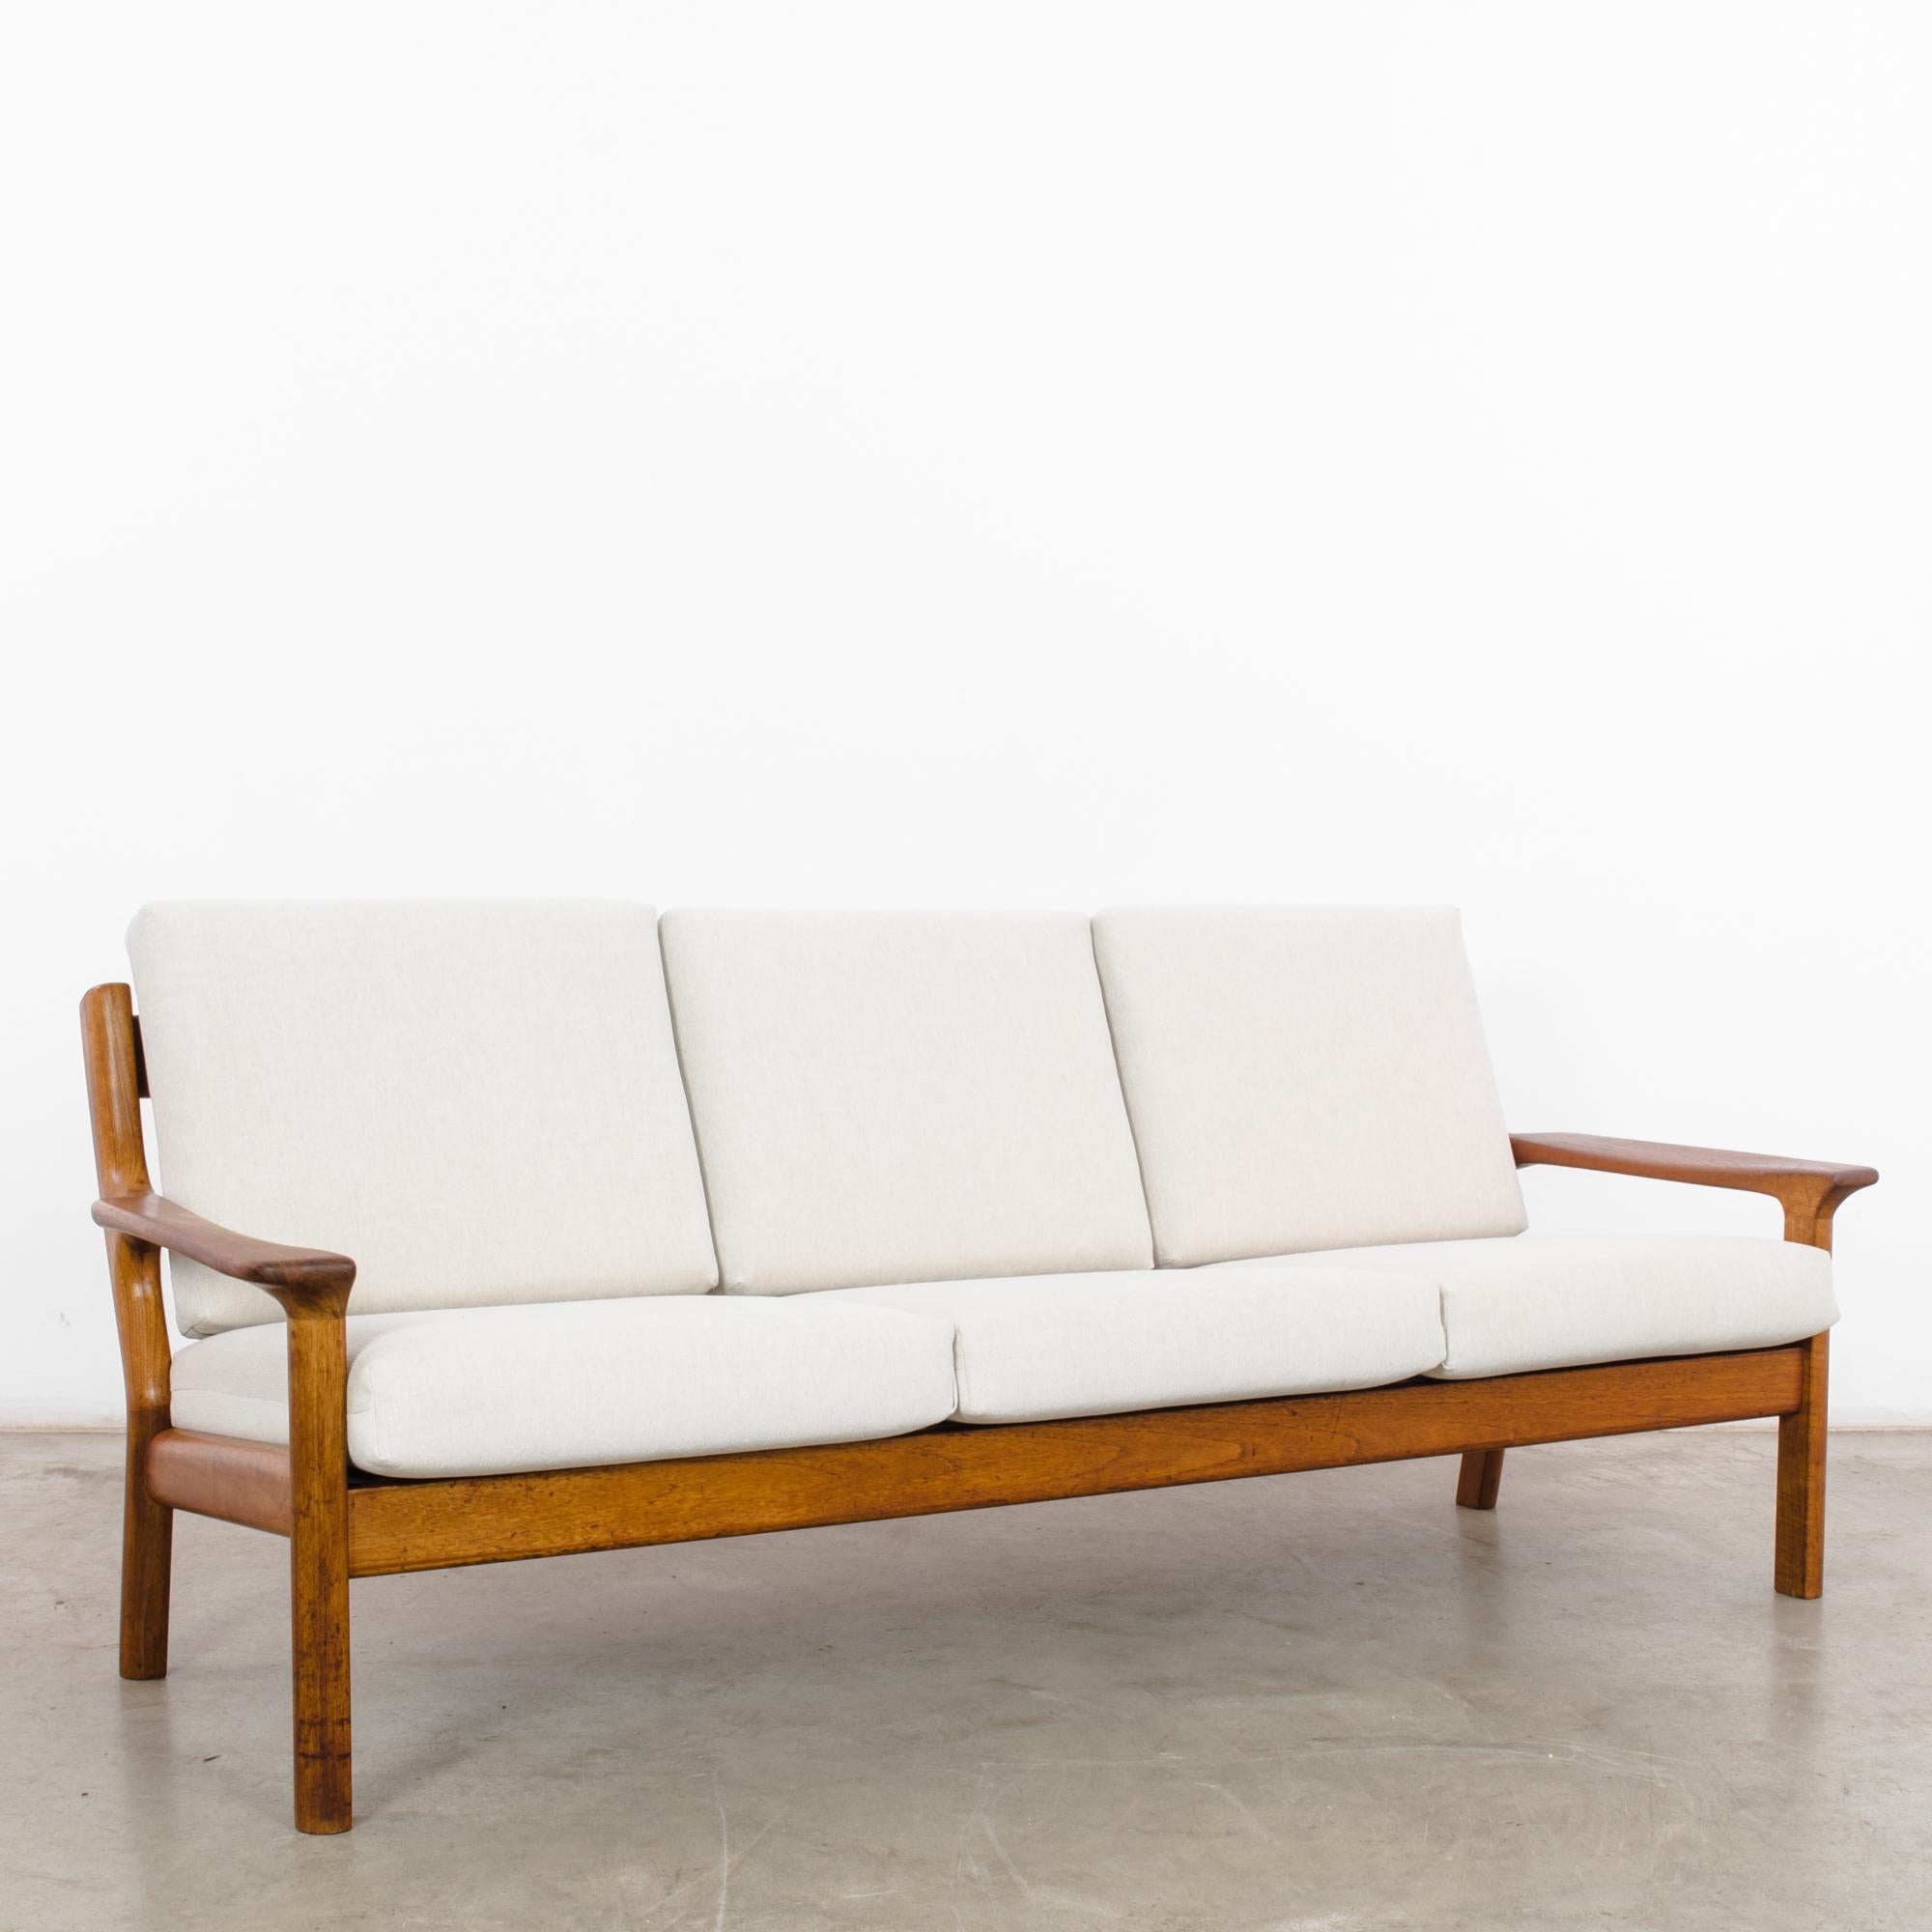 In the dynamic design landscape of 1960s Denmark, this teak sofa by Svend Age Eriksen for Glostrup Møbelfabrik epitomizes the sleek sophistication and minimalist charm of the era. Crafted with meticulous attention to detail, this piece represents